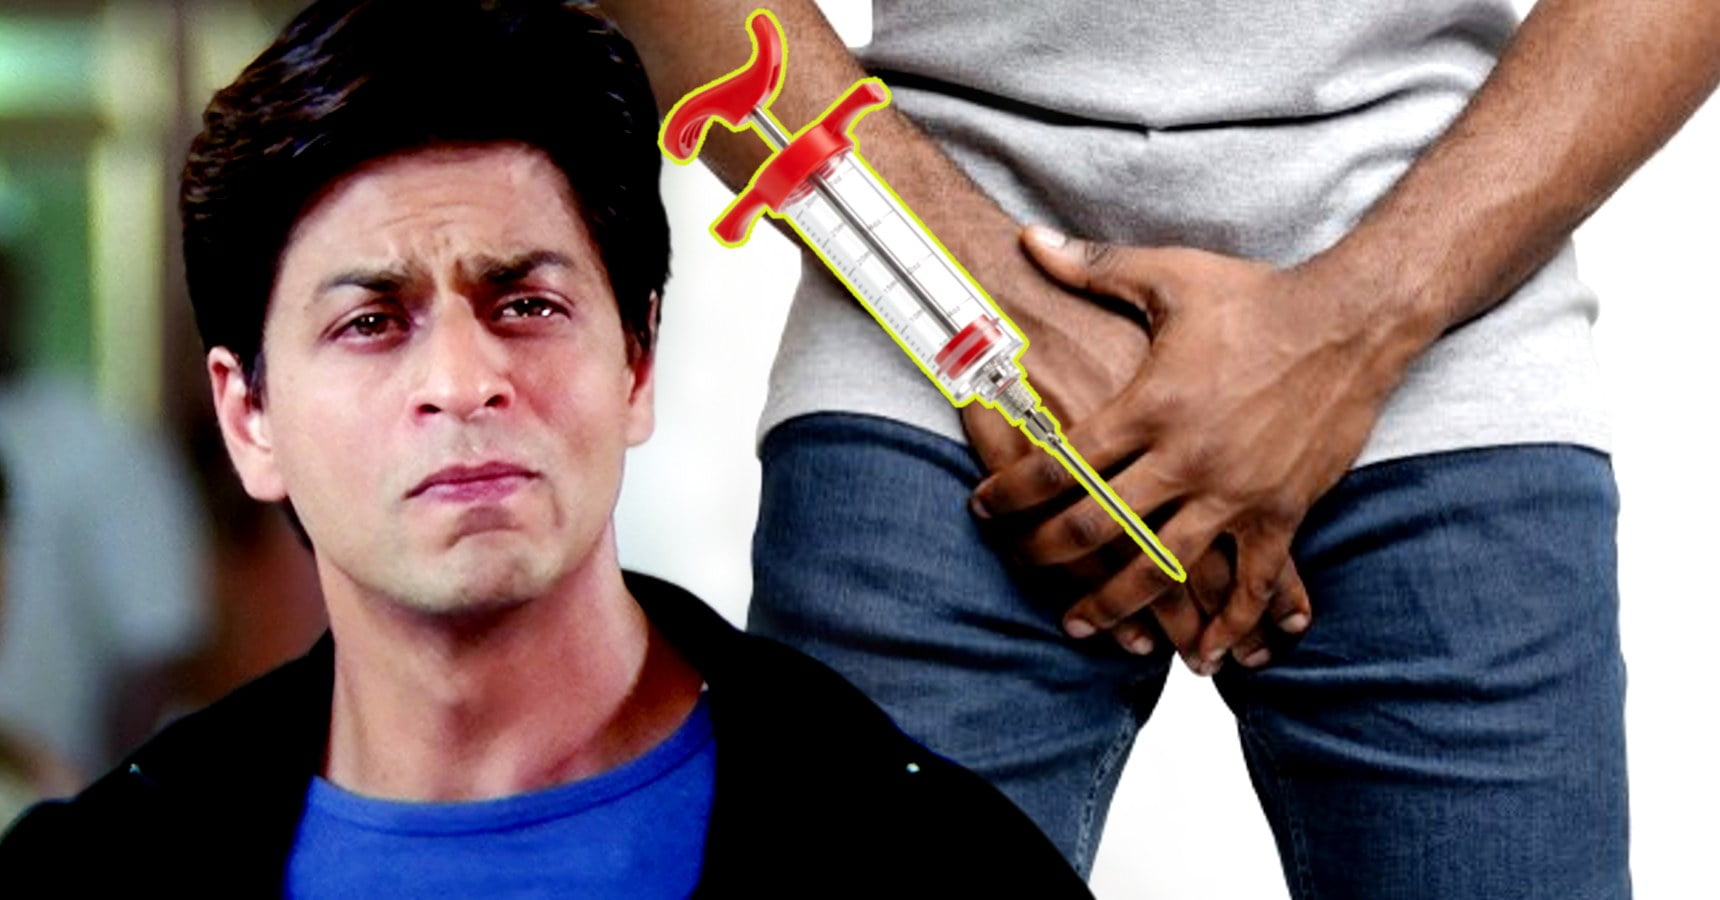 When Shahrukh Khan recalled his most embarrassing moment, having needles stuck in his private parts